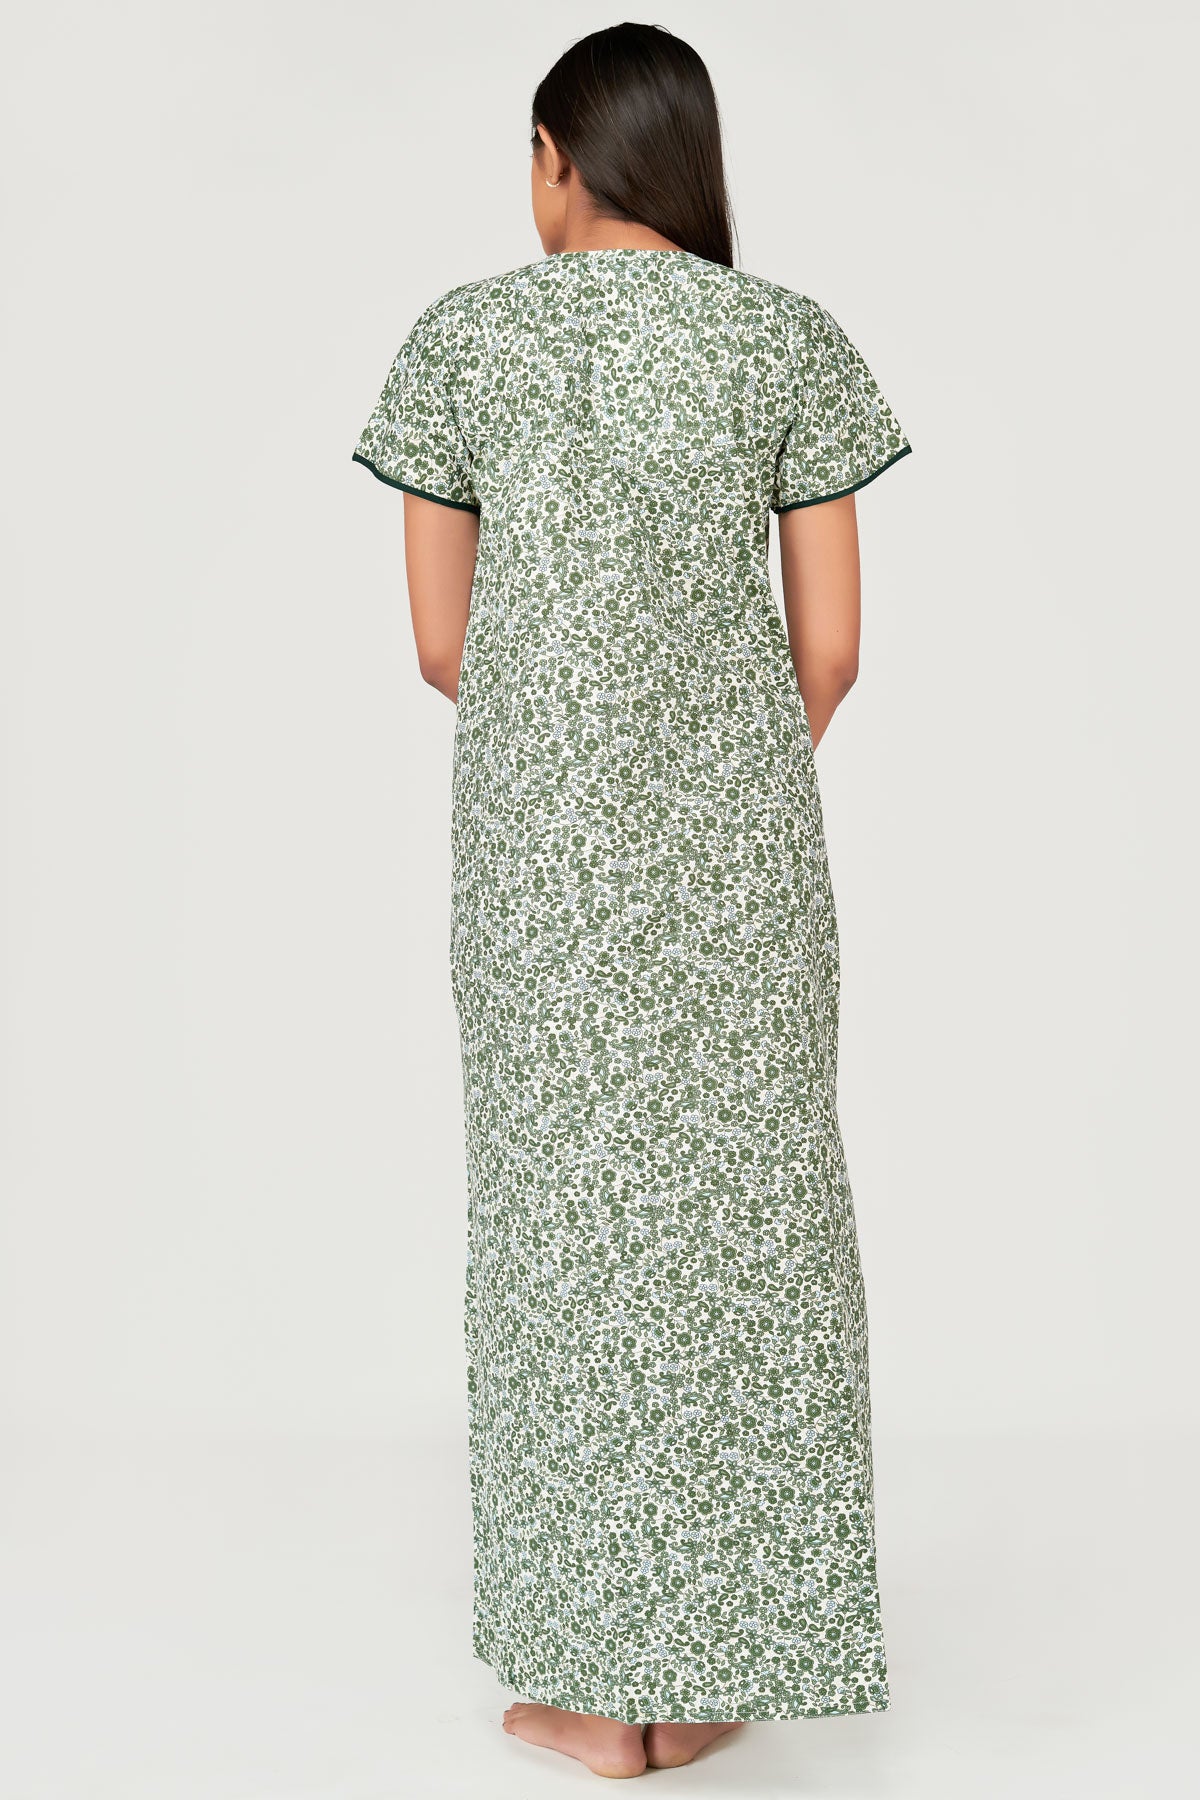 Ditsy Floral Printed & Embroidered Women's Nighty - Green